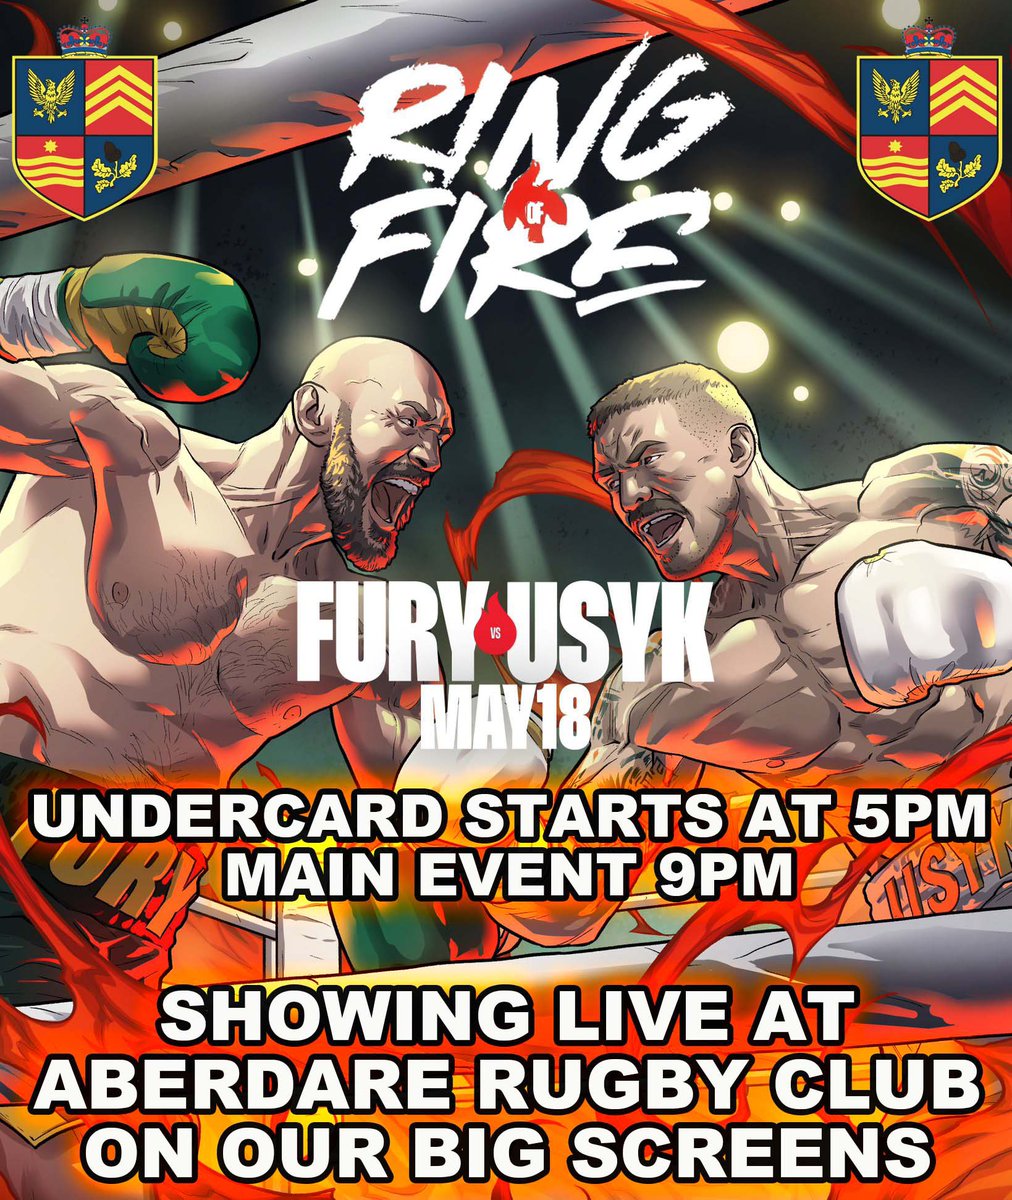 Don't miss the heavyweight showdown of the year!🥊 The Gypsy King vs The Cat live on our big screens!🥊 Saturday, May 18th. Enjoy a great selection of drinks while watching the action🍻 #FuryUsyk